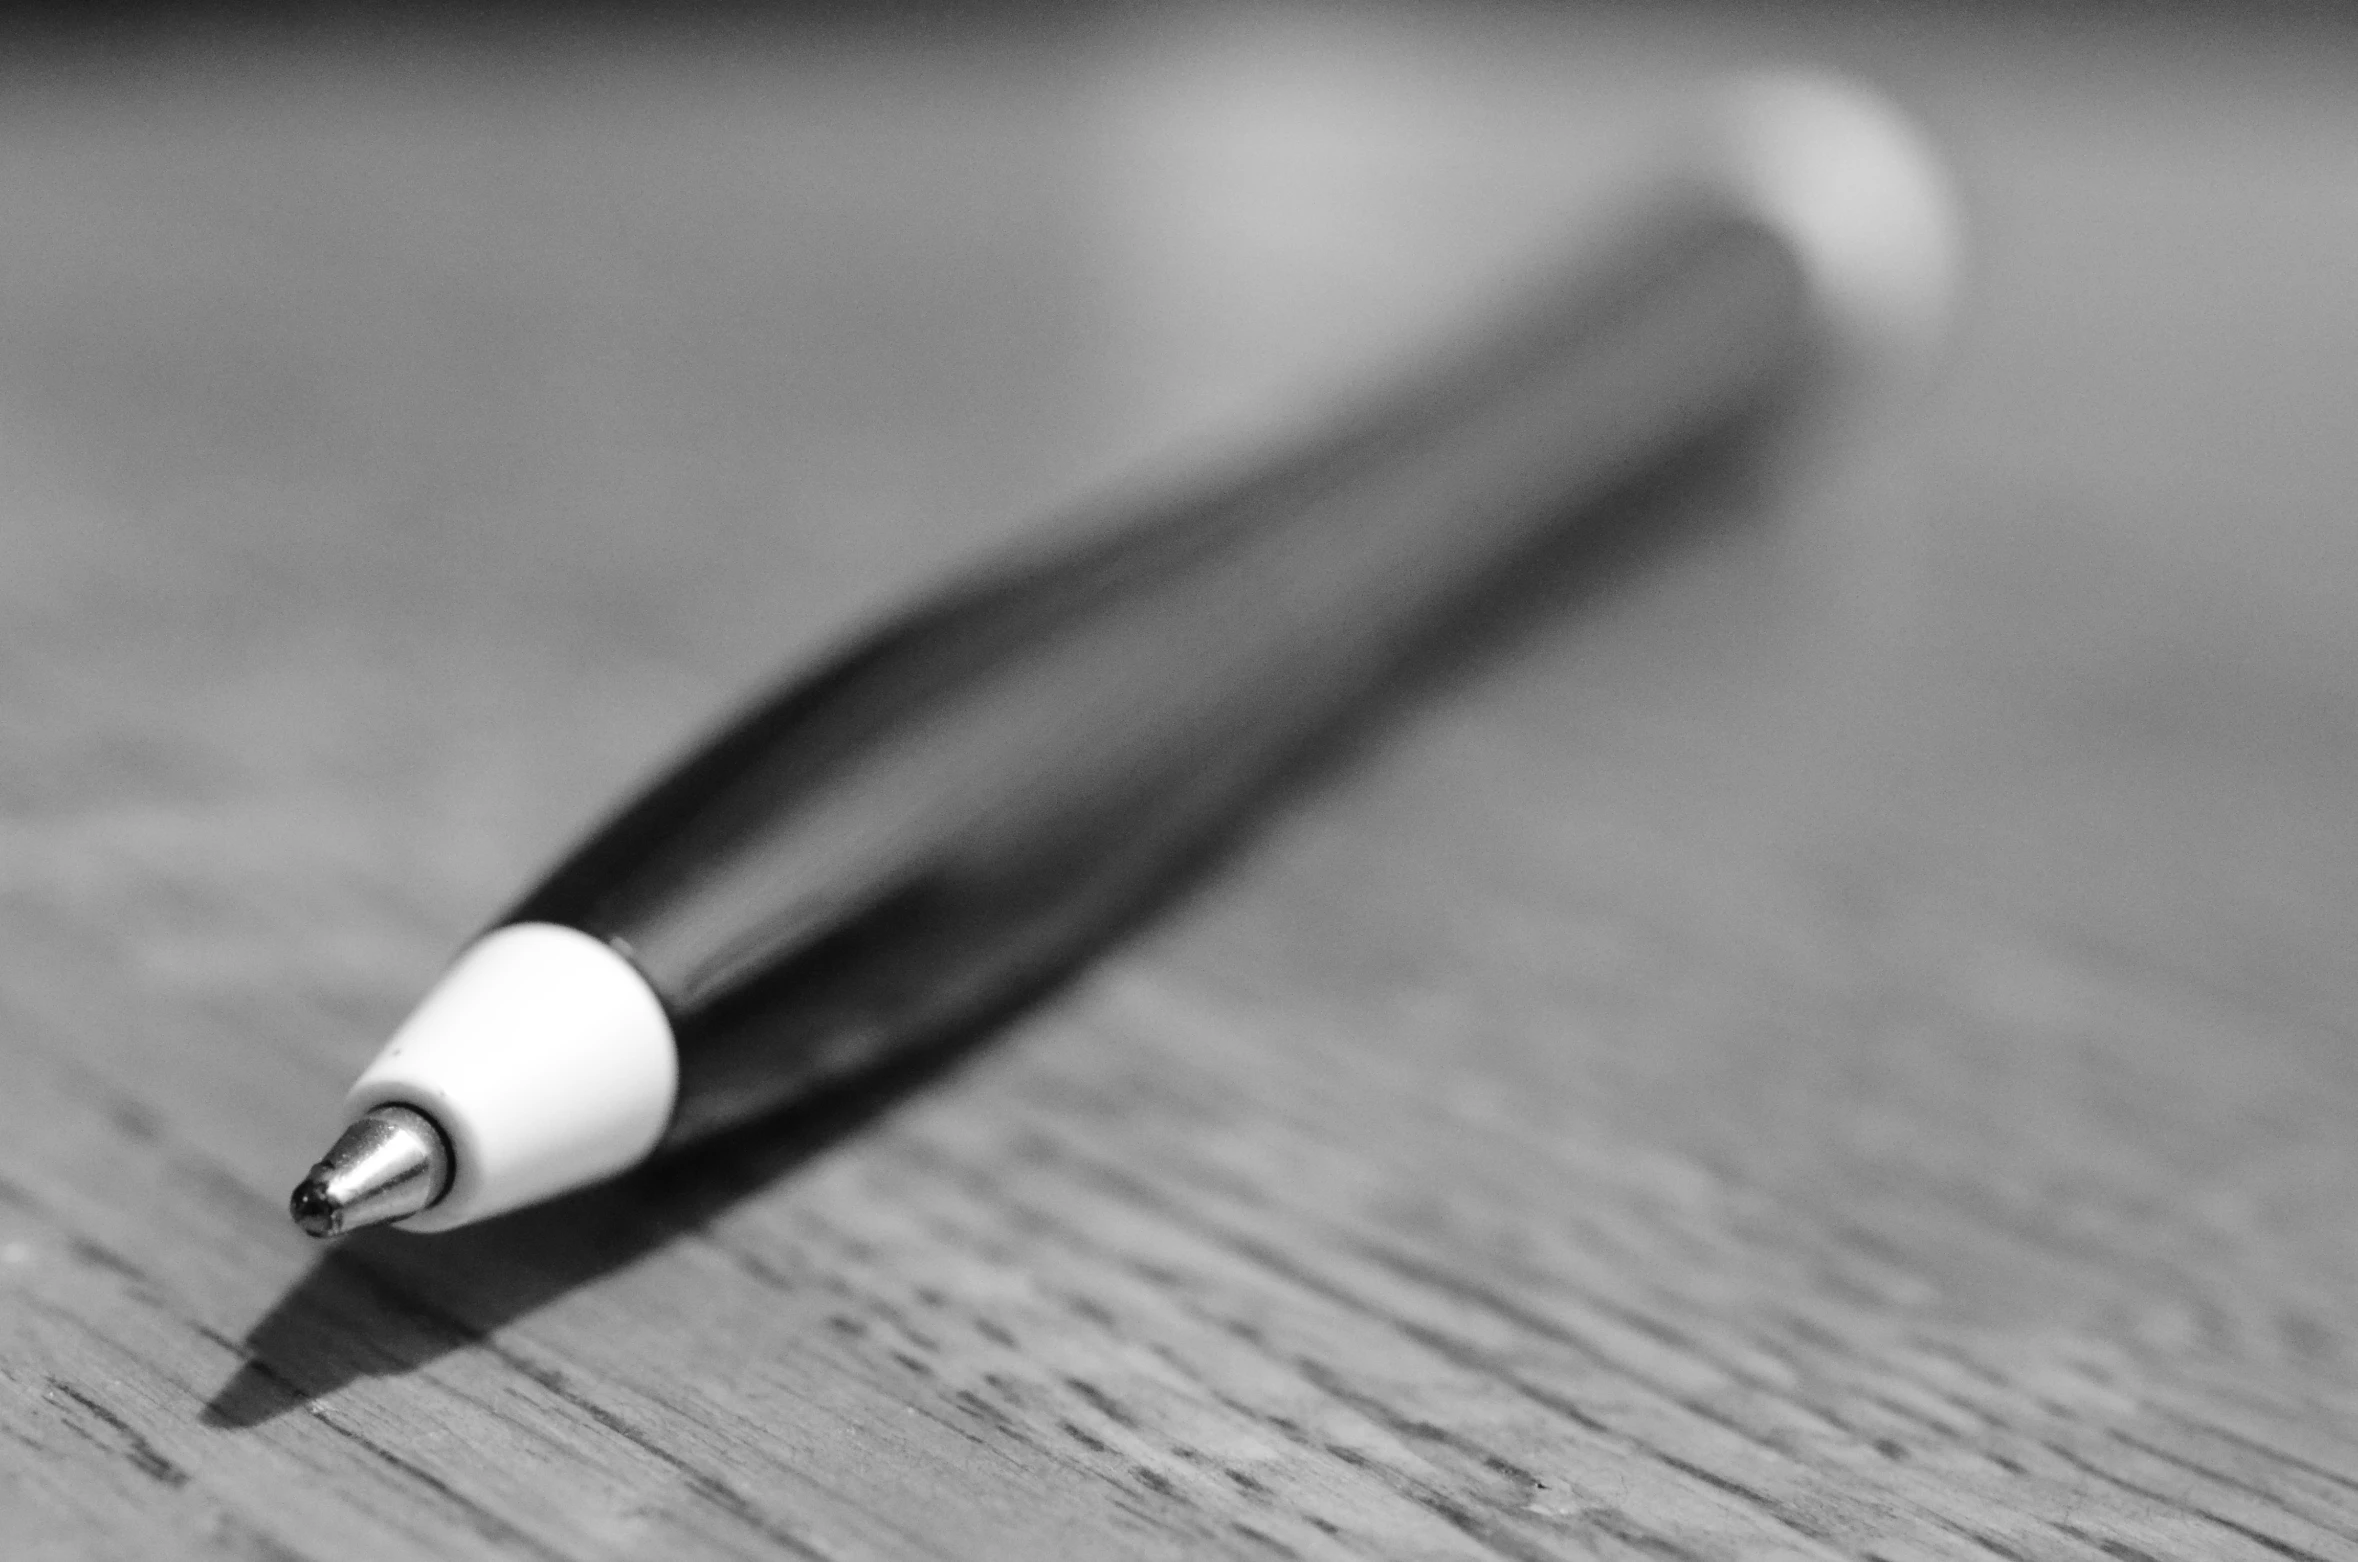 a pen with a black and white tip sits on a wooden surface